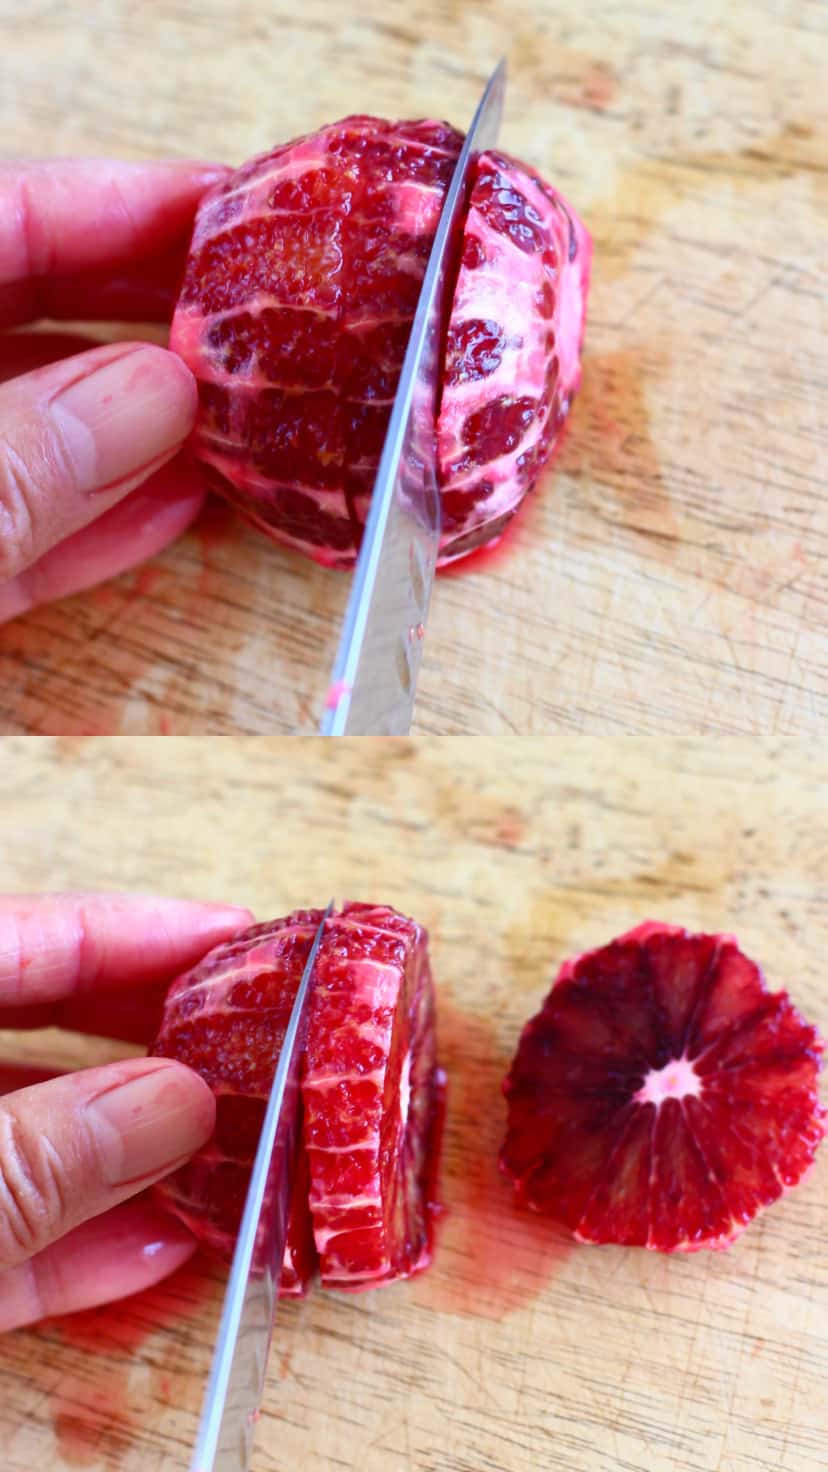 A peeled blood orange being cut into slices with a knife